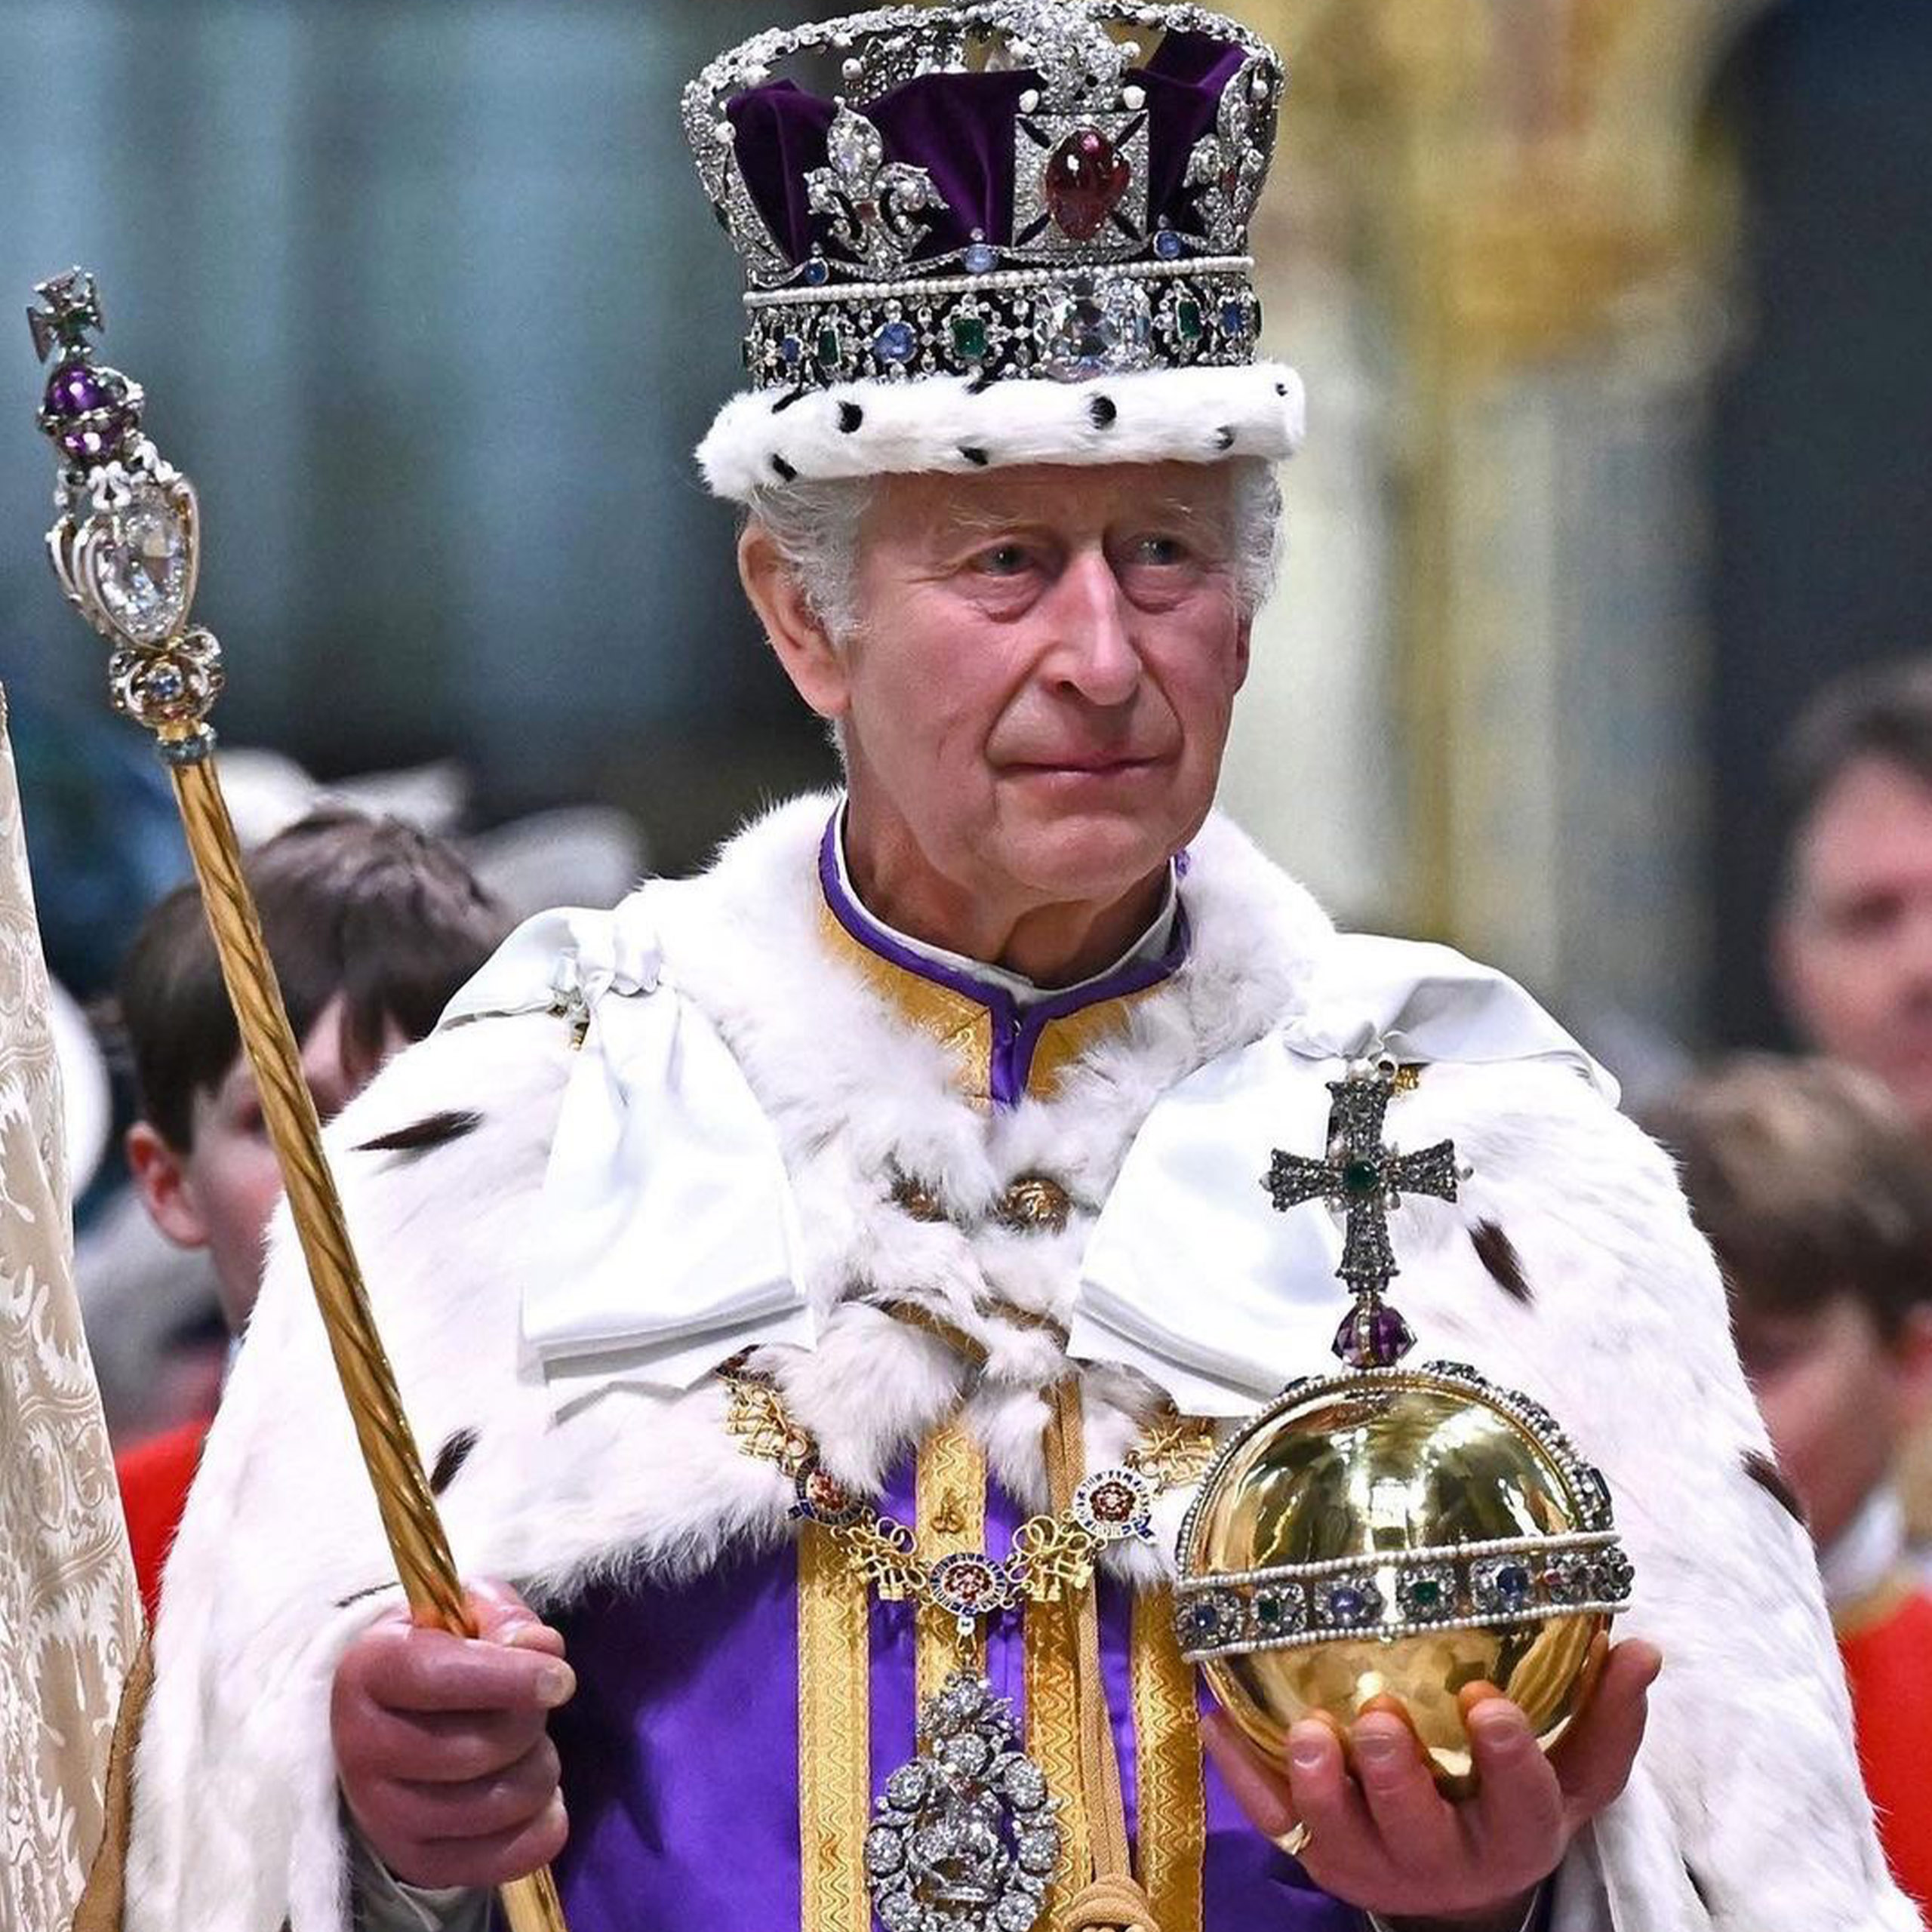 Fit For a King: Everything King Charles III Wore on His Coronation